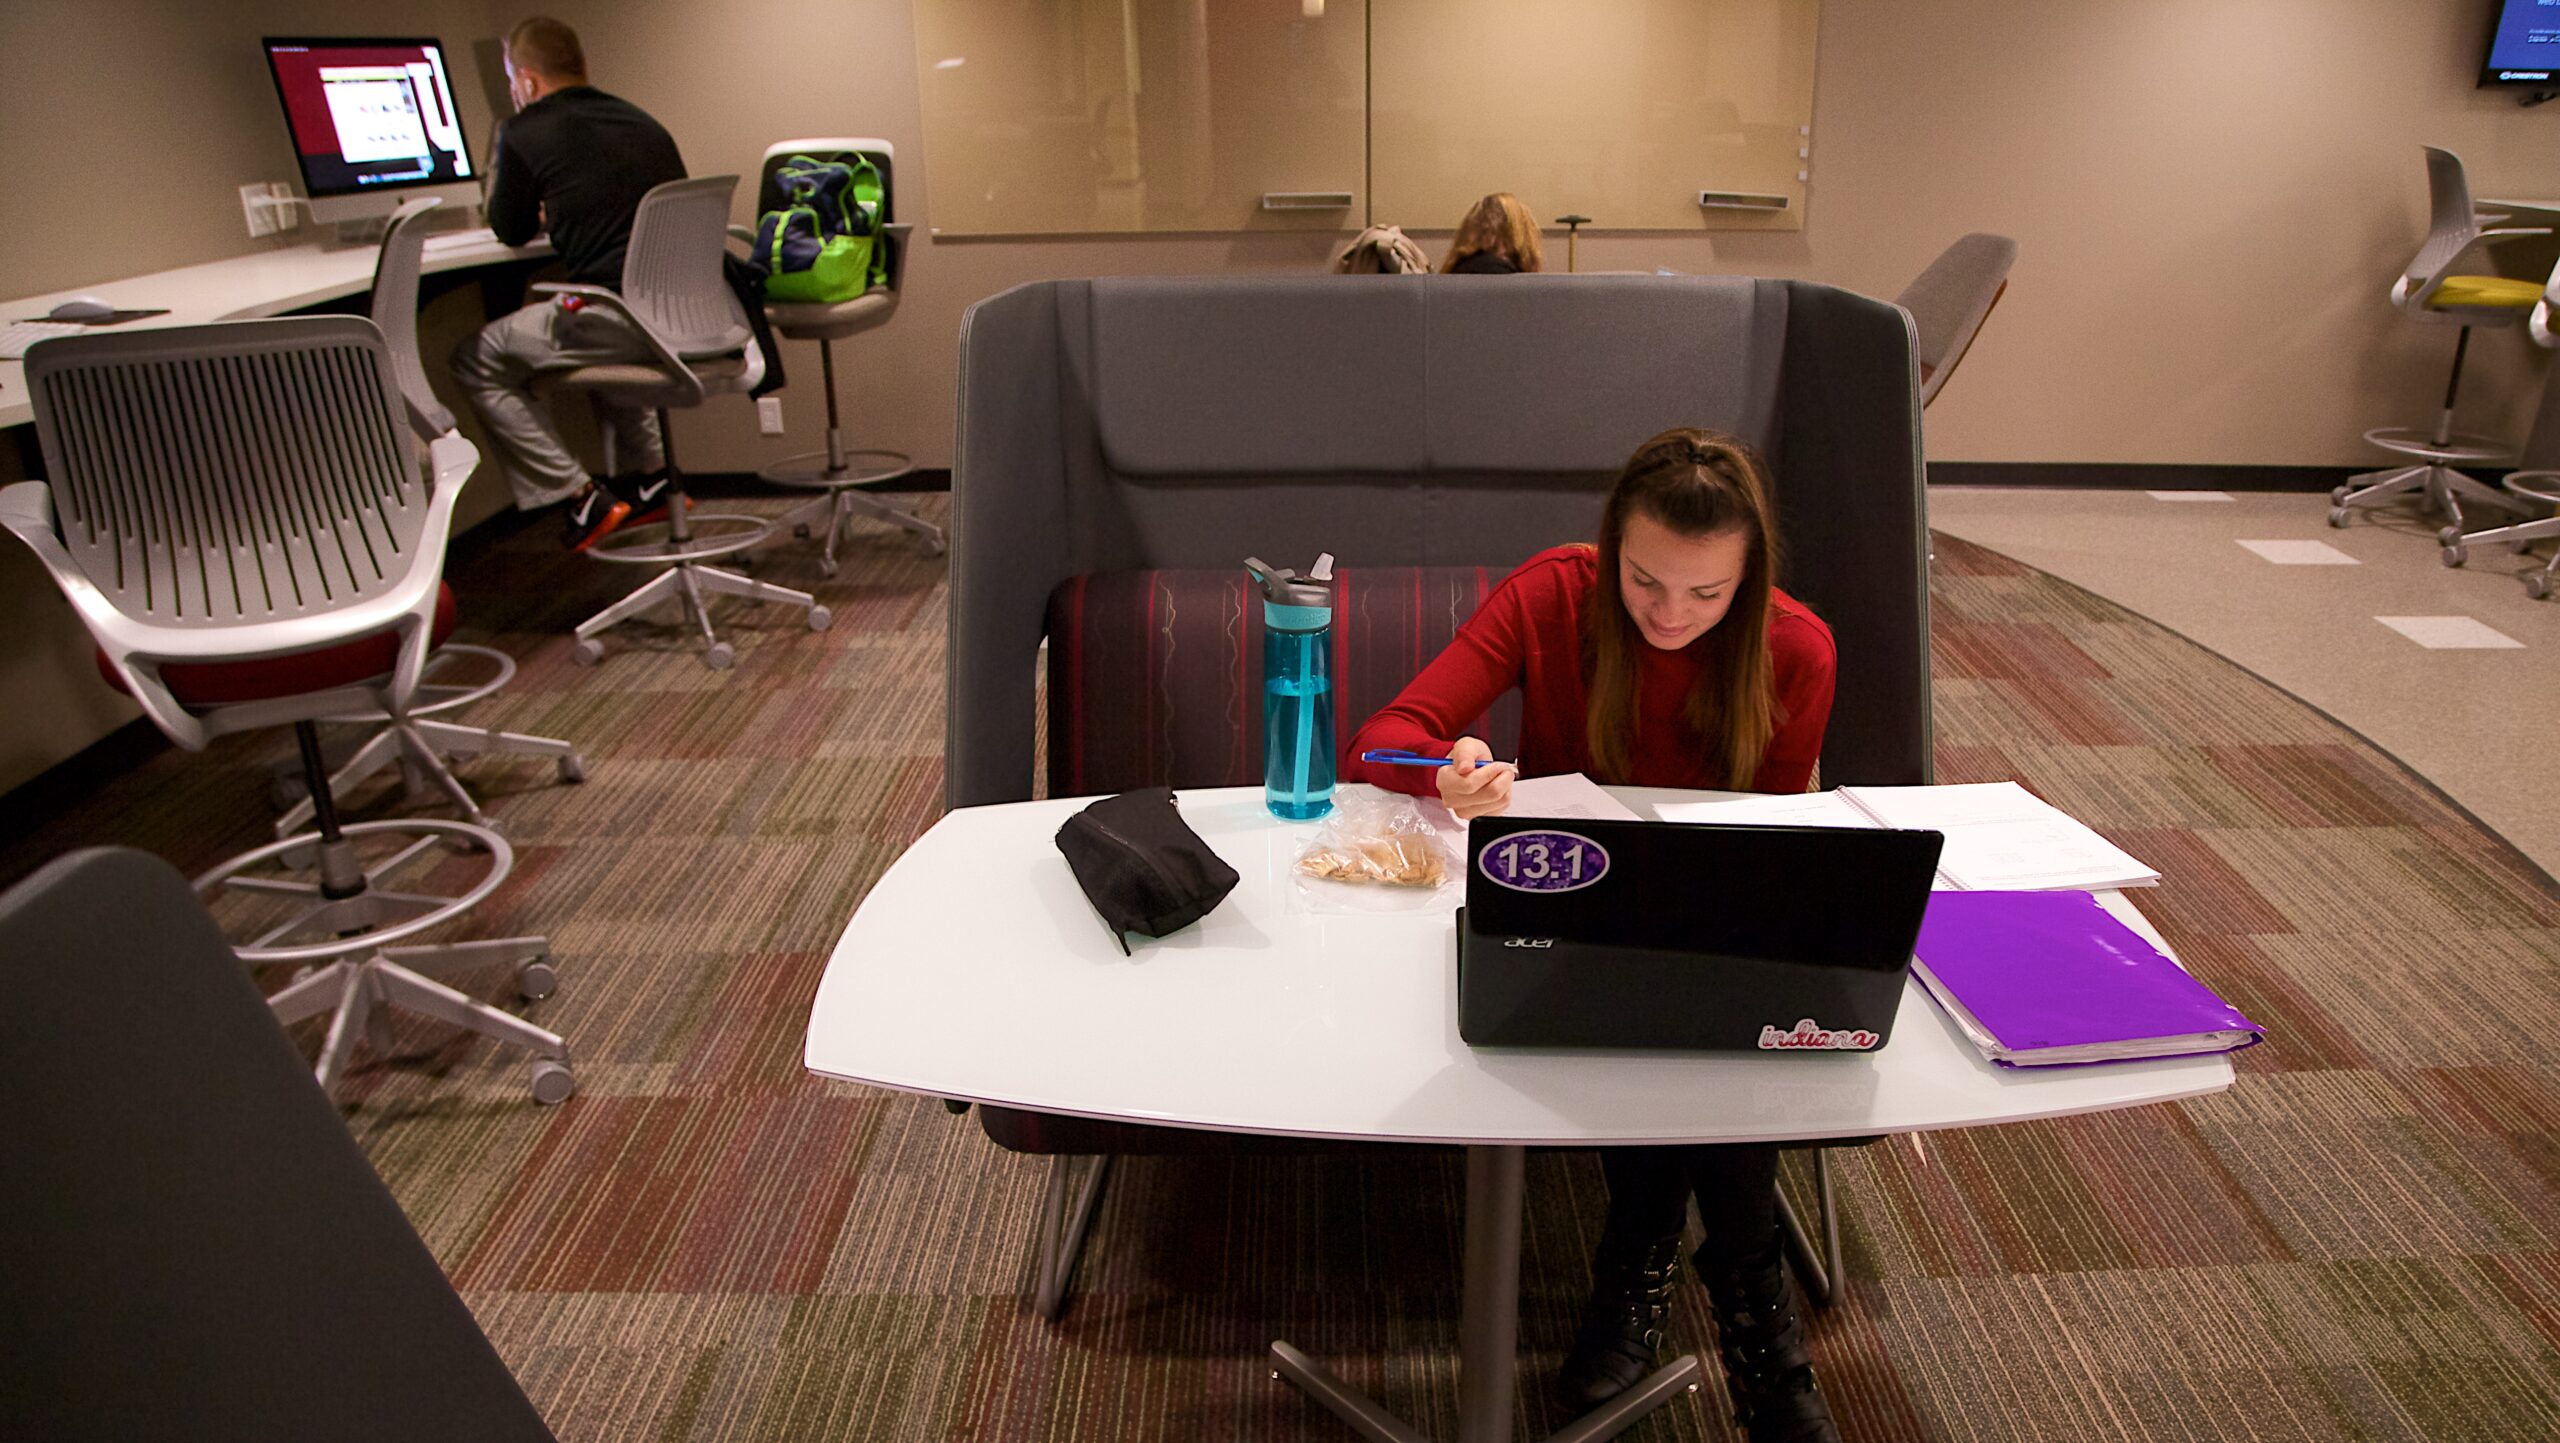 Indiana University's informal learnings spaces allow students to participate in a range of activities. 